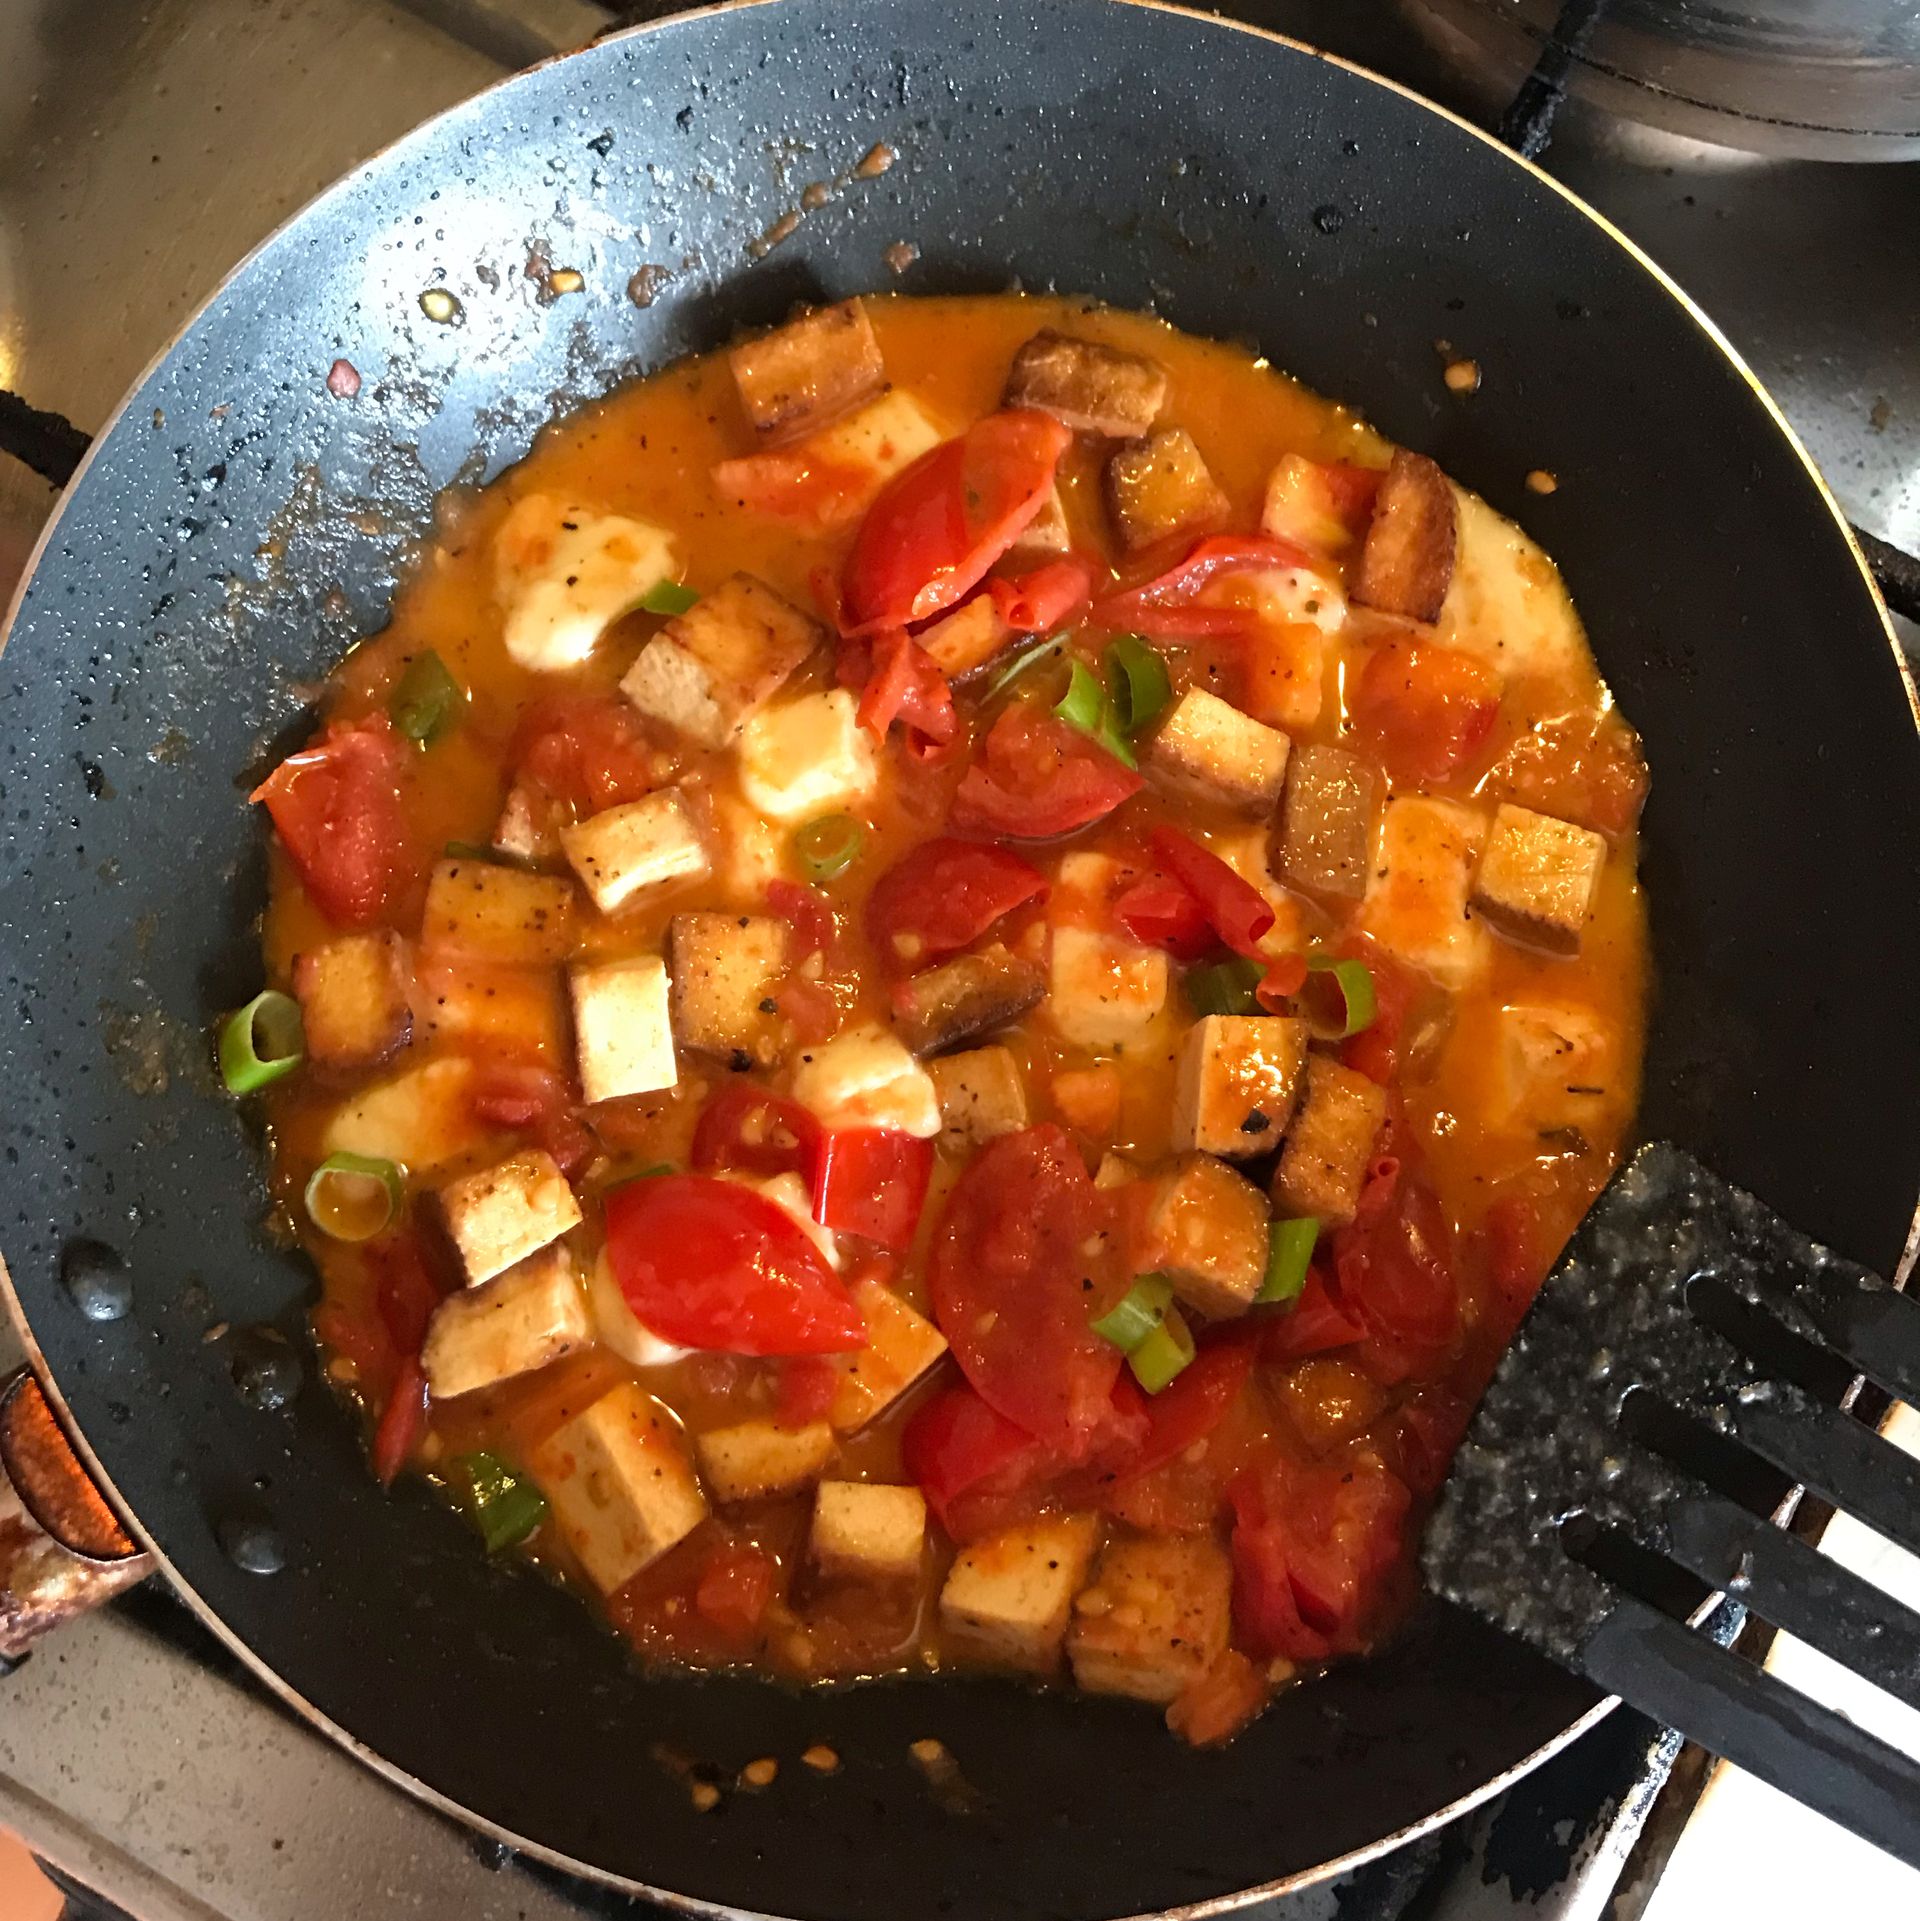 Gnocchi with tofu and tomatoes